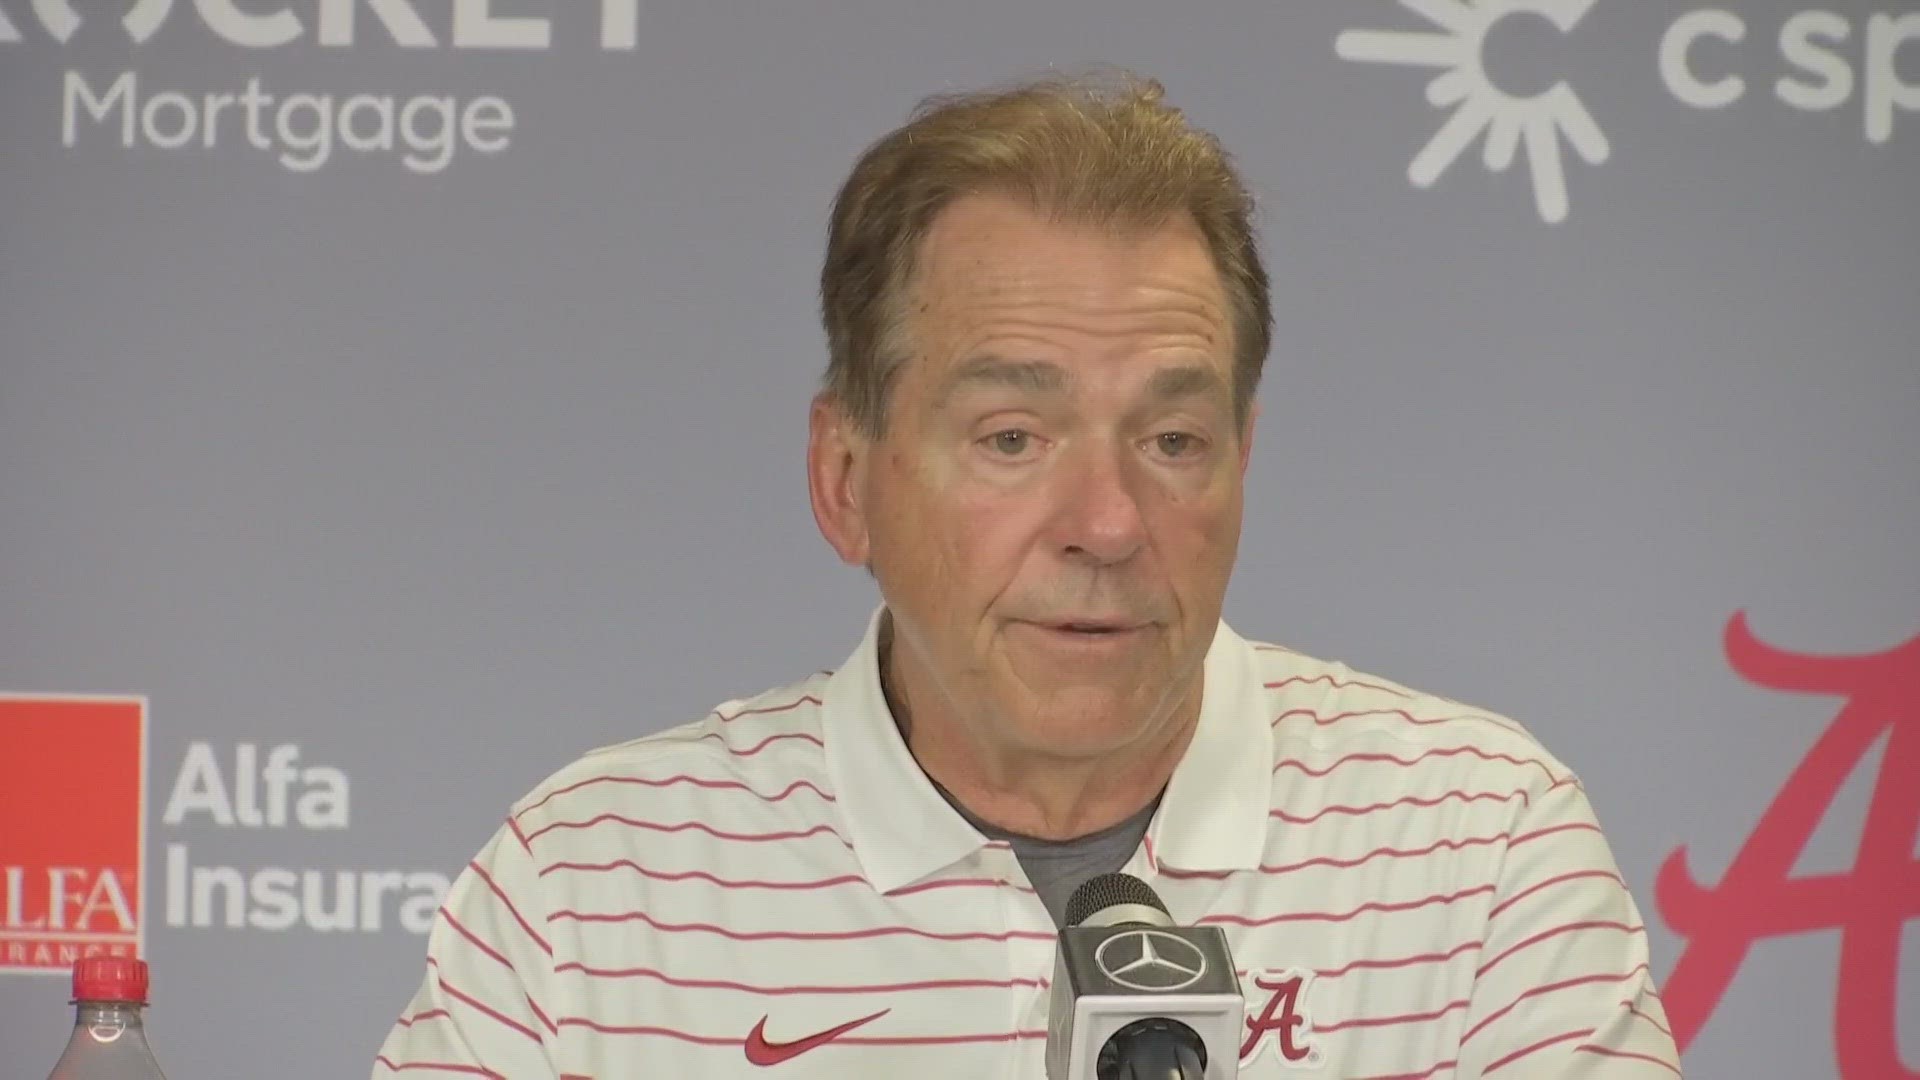 On Saturday, Sept. 9, Nick Saban spoke to the media following the Crimson Tide's 34-24 loss to the Longhorns.